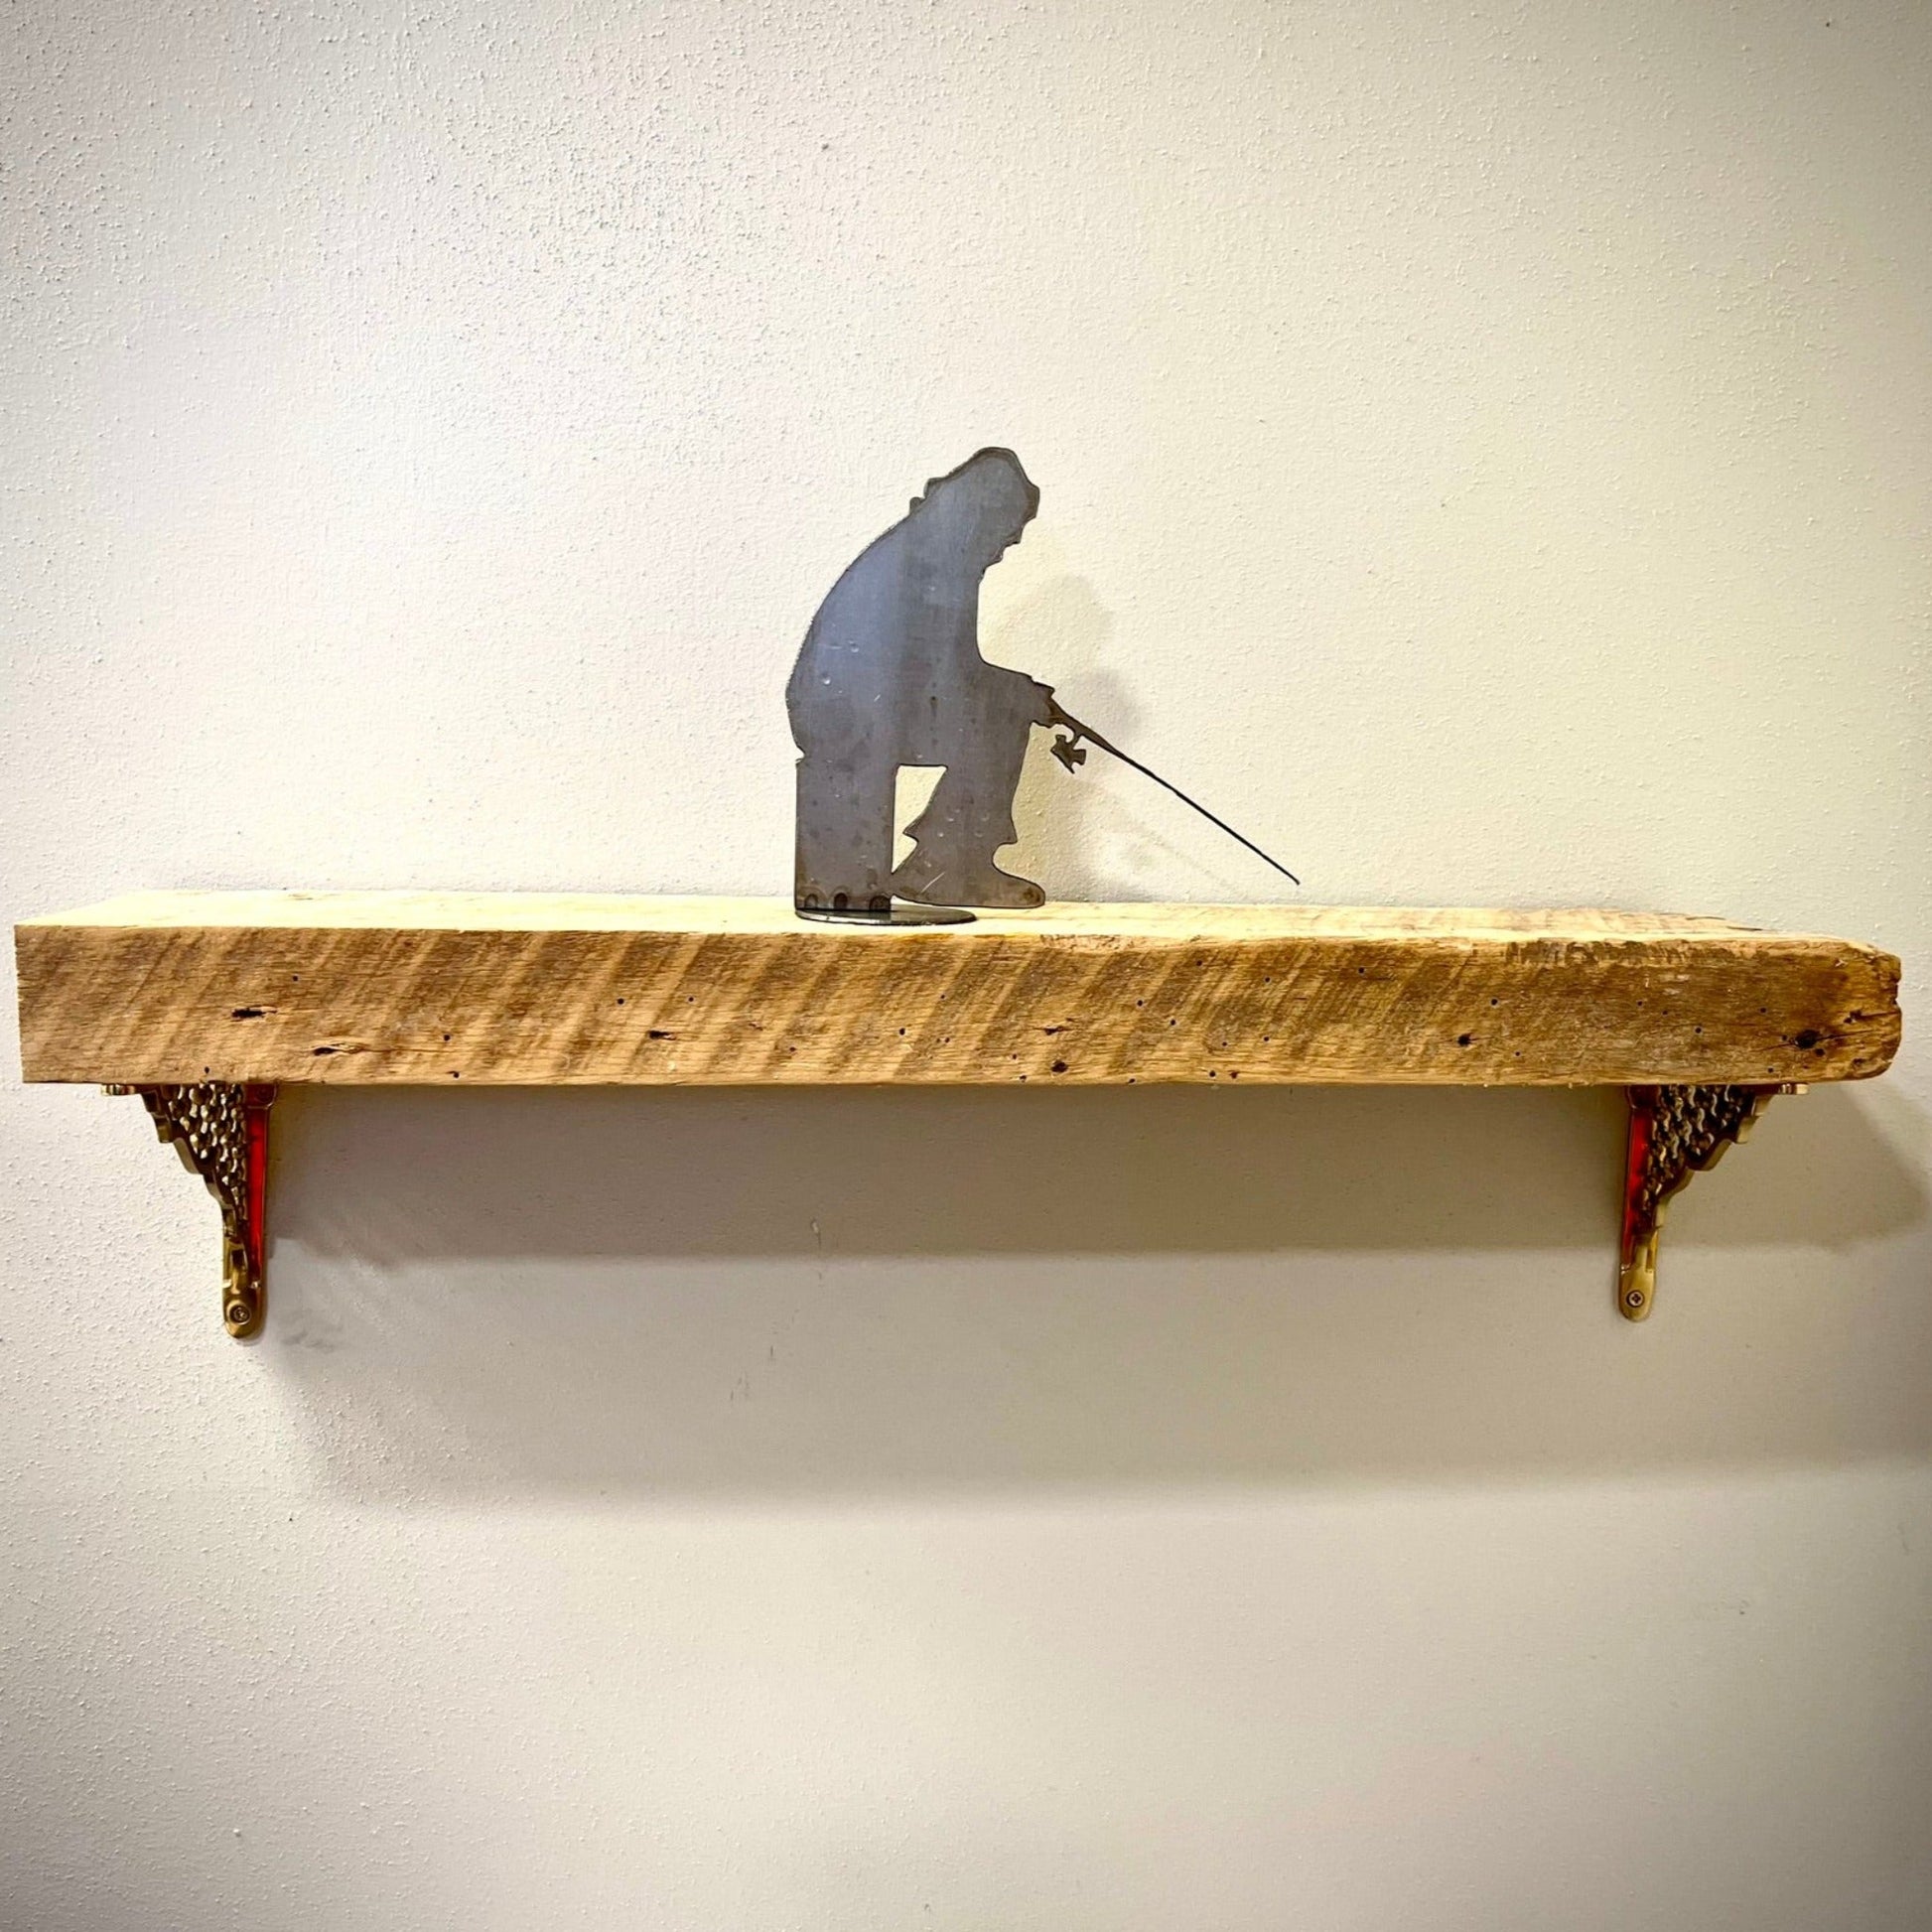 Steel Stand - up Ice Fisherman - Mantel - cabin sign - fish - Northern Forge, LLC